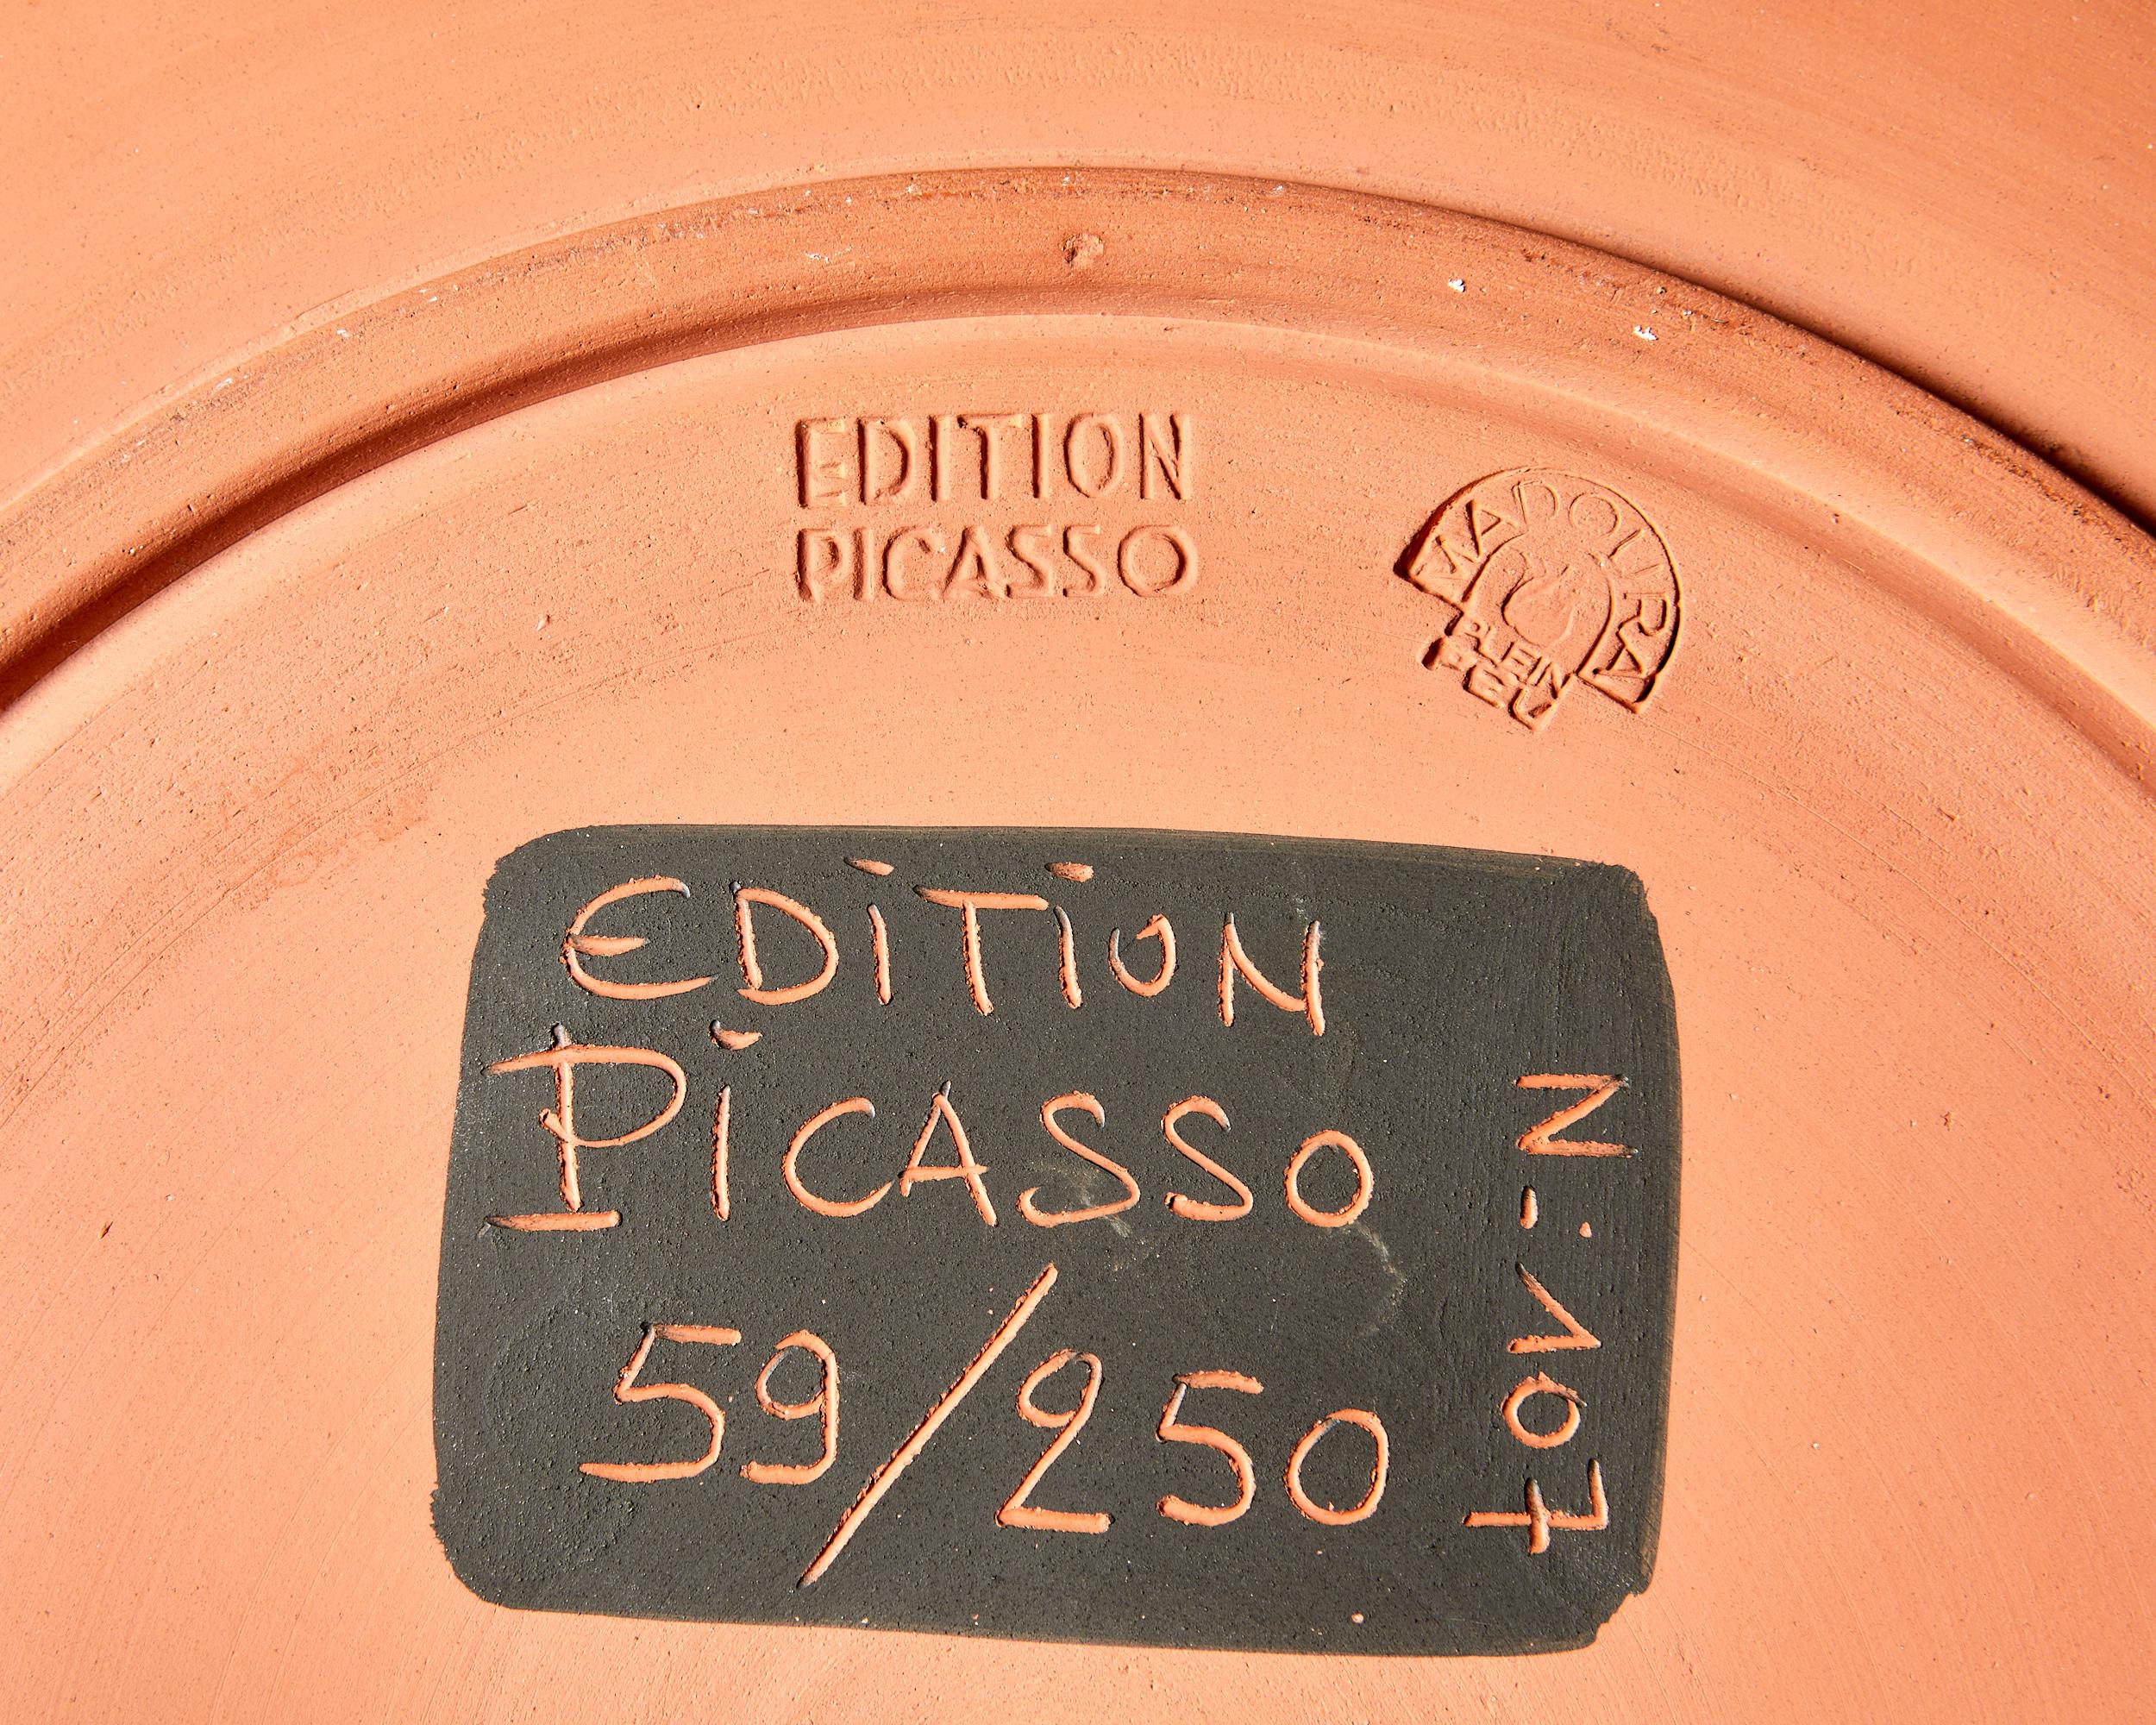 Ceramic Pablo Picasso, Bull, Turned round dish, 1957, edition of 250 copies. For Sale